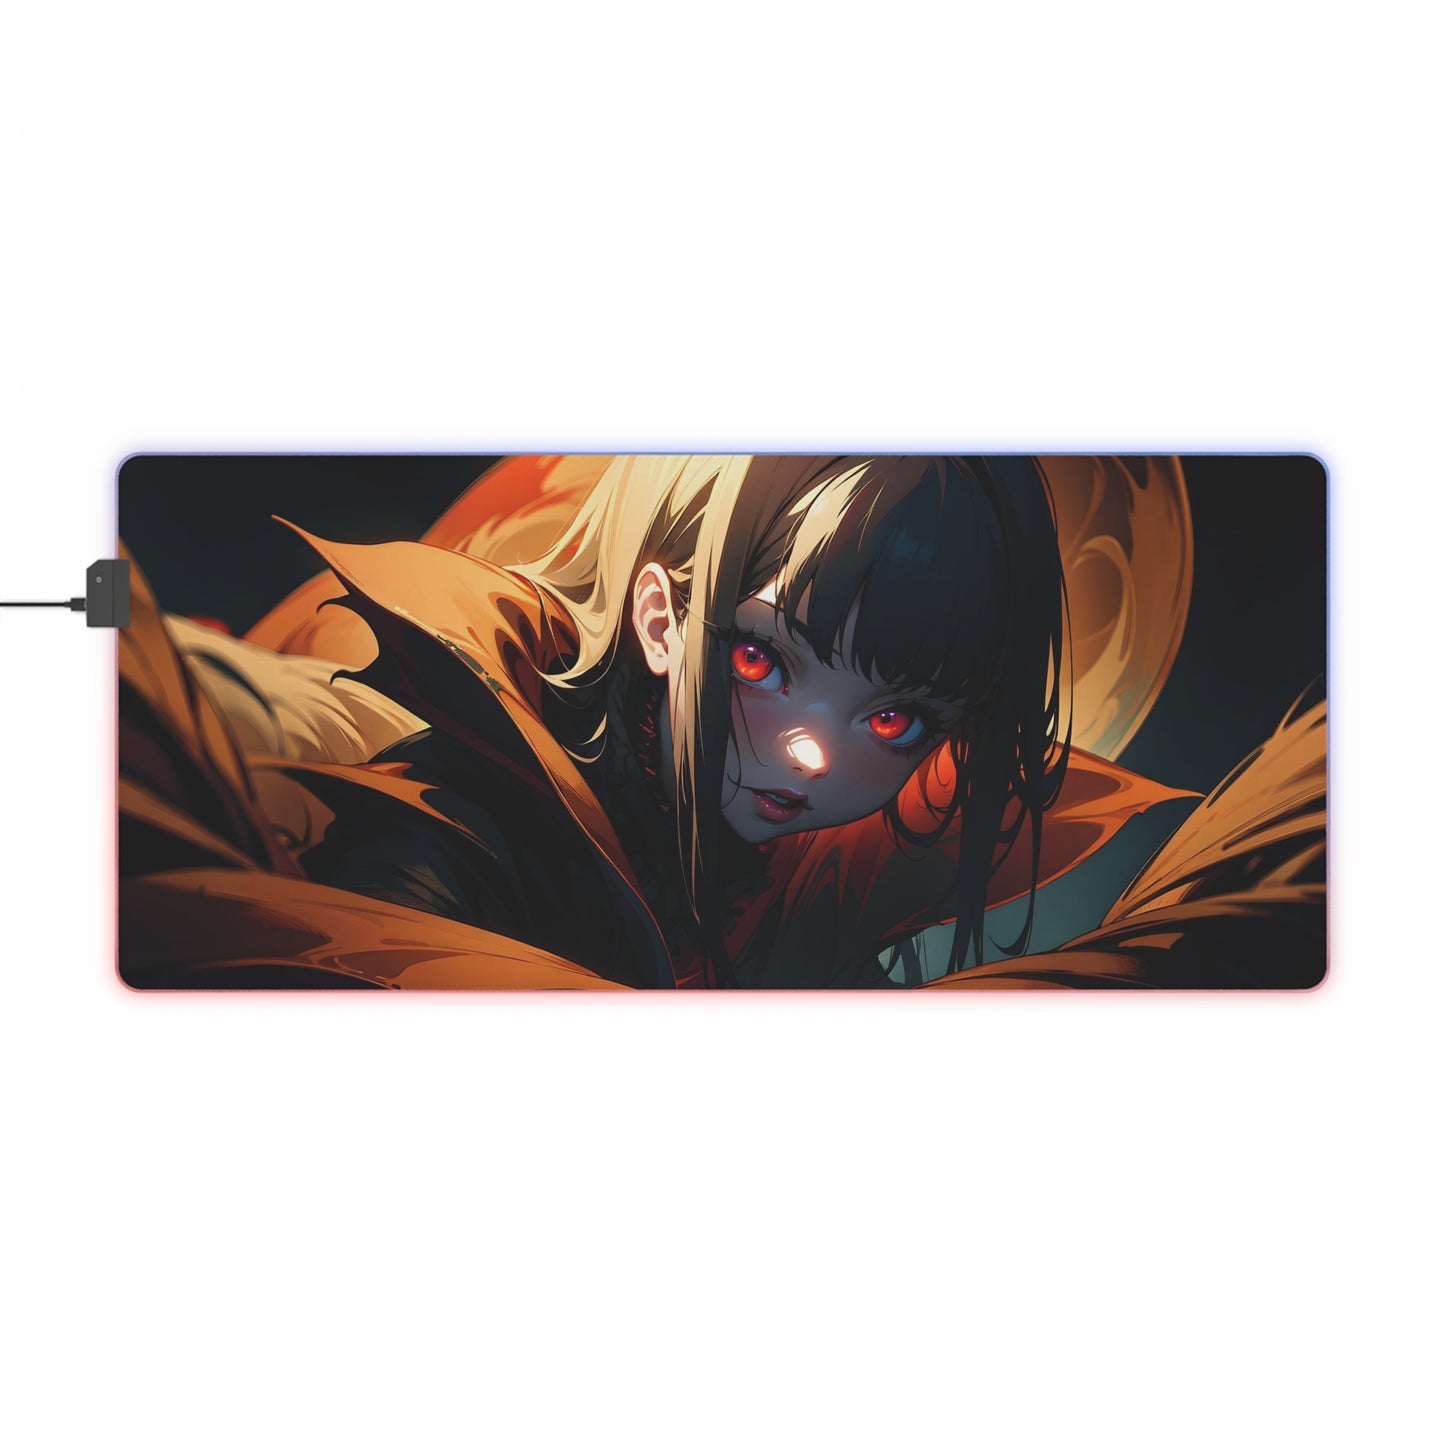 AG-19 LED Gaming Mouse Pad